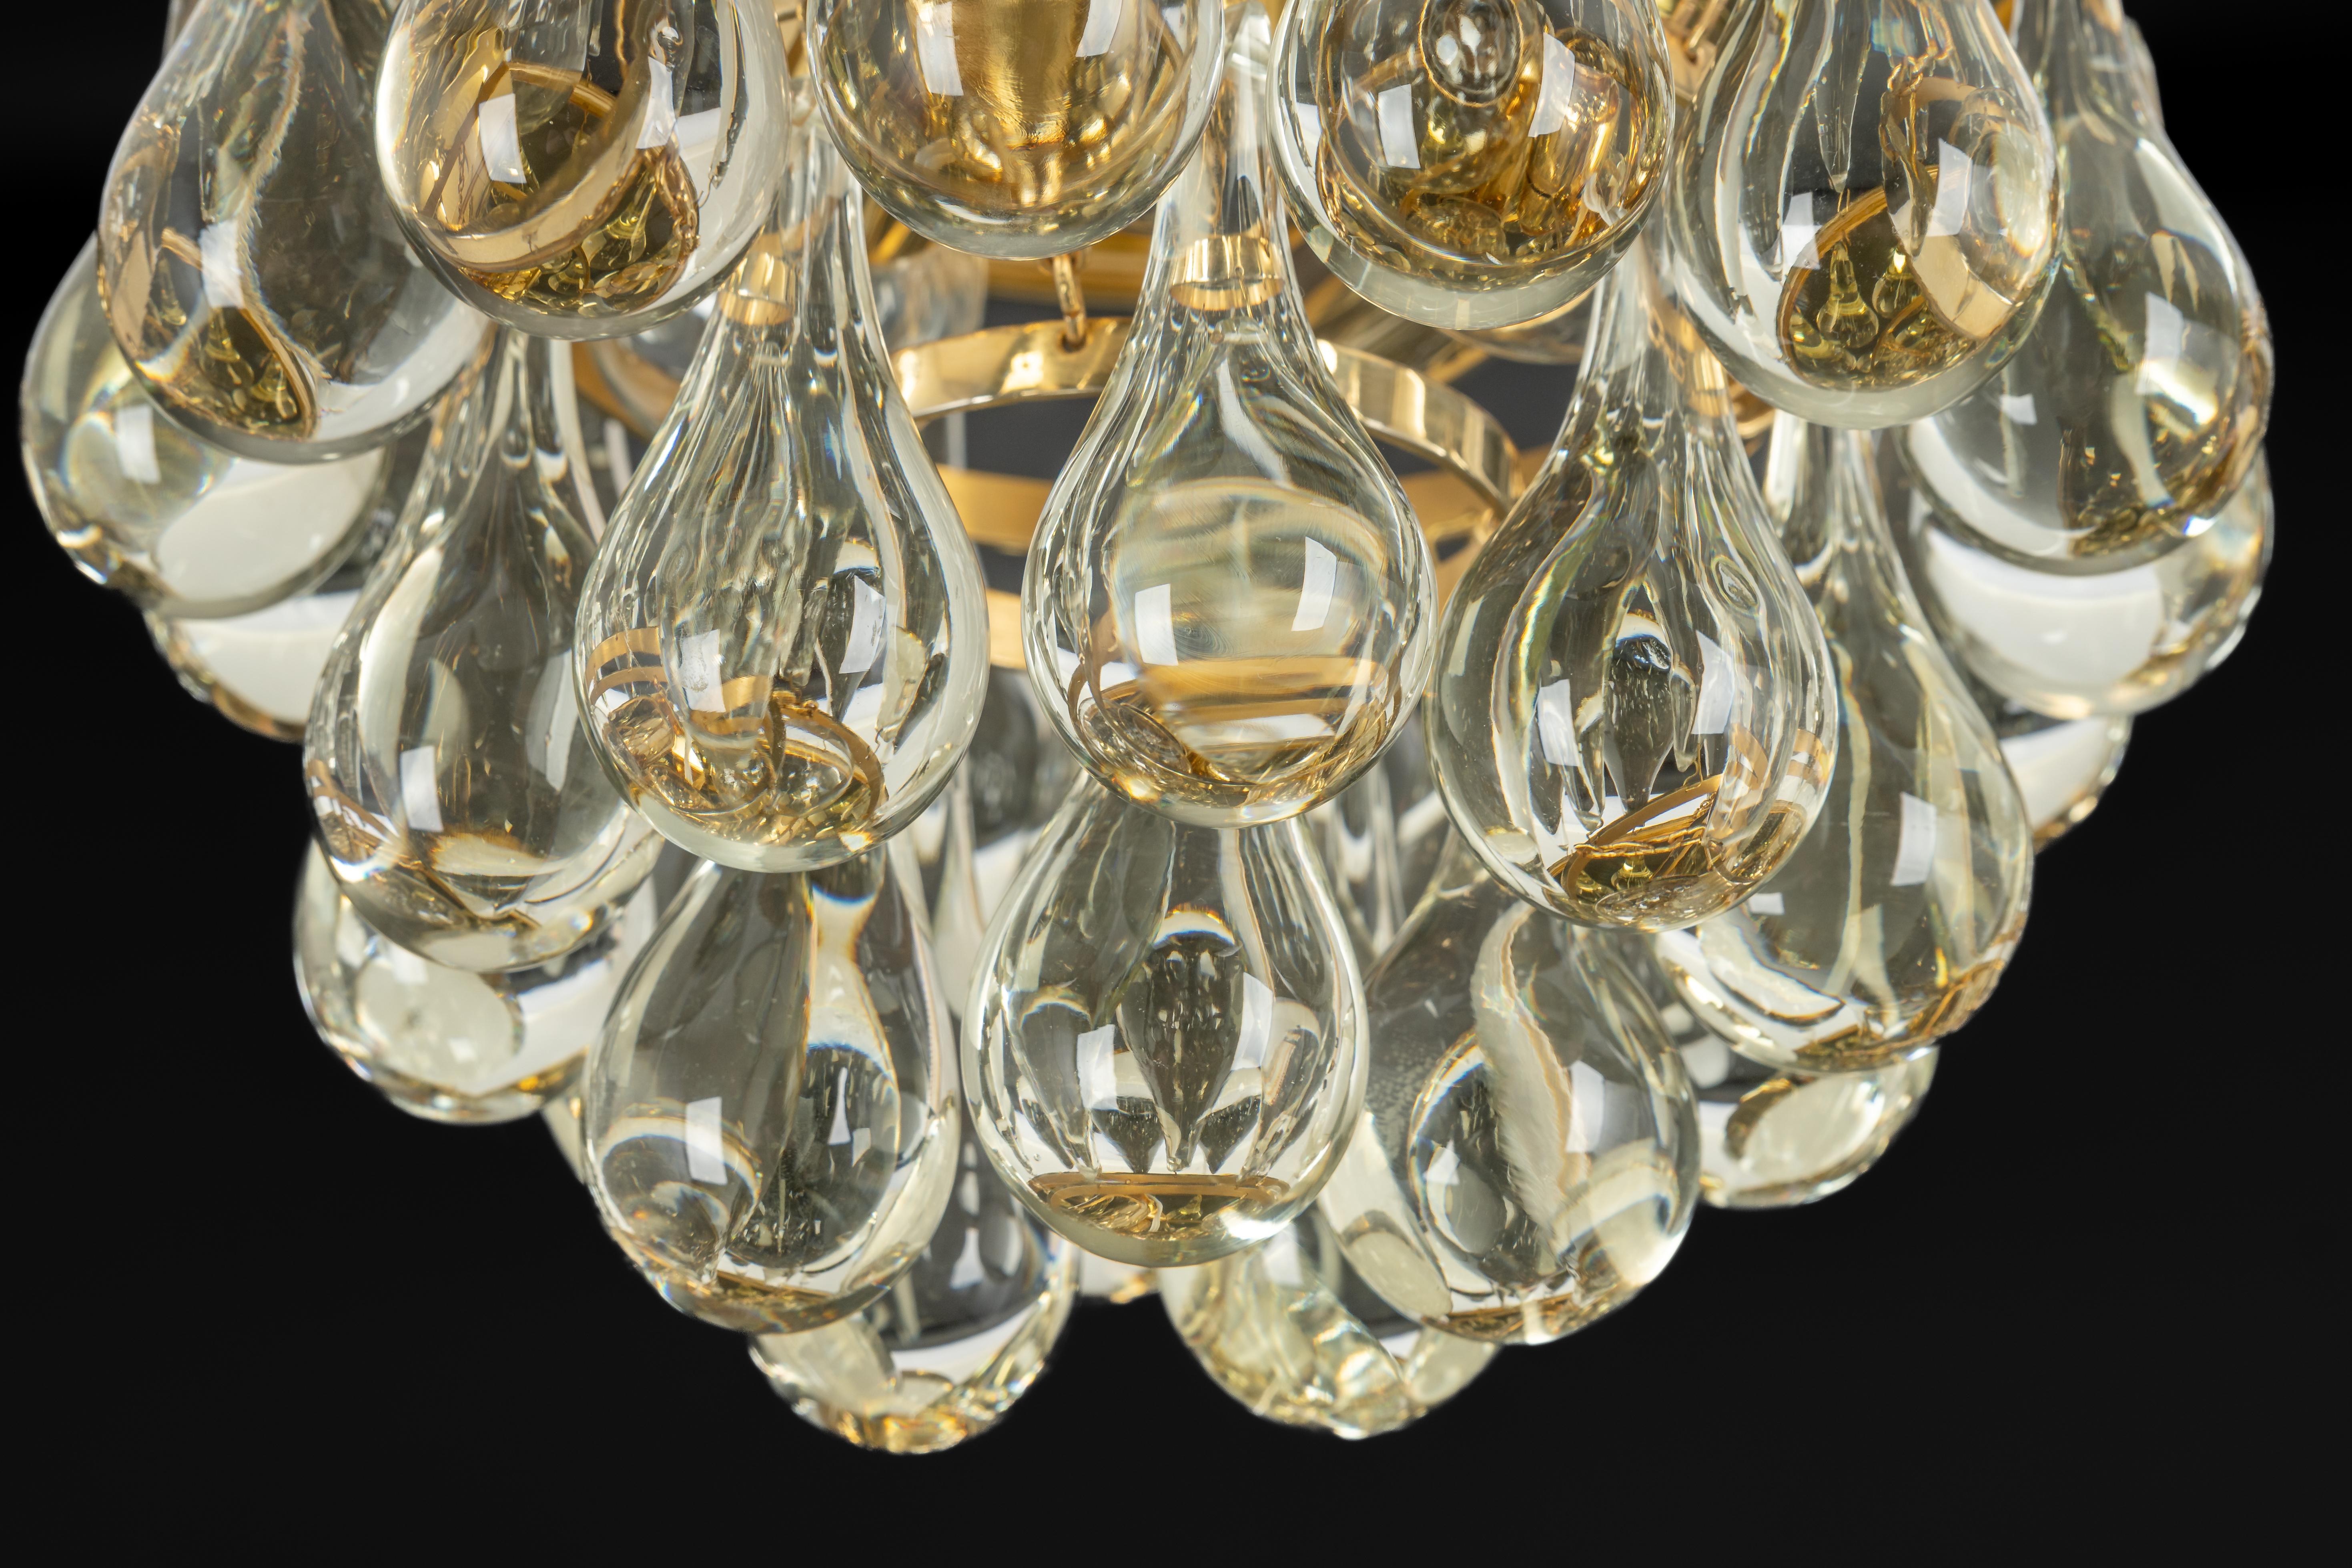 A stunning petite flush mount light by Christoph Palme, Germany, was manufactured in the 1970s. It’s composed of Murano teardrop glass pieces on a metal /brass frame.
High quality of materials.

Sockets: It needs 2 x E14 base bulbs to illuminate.